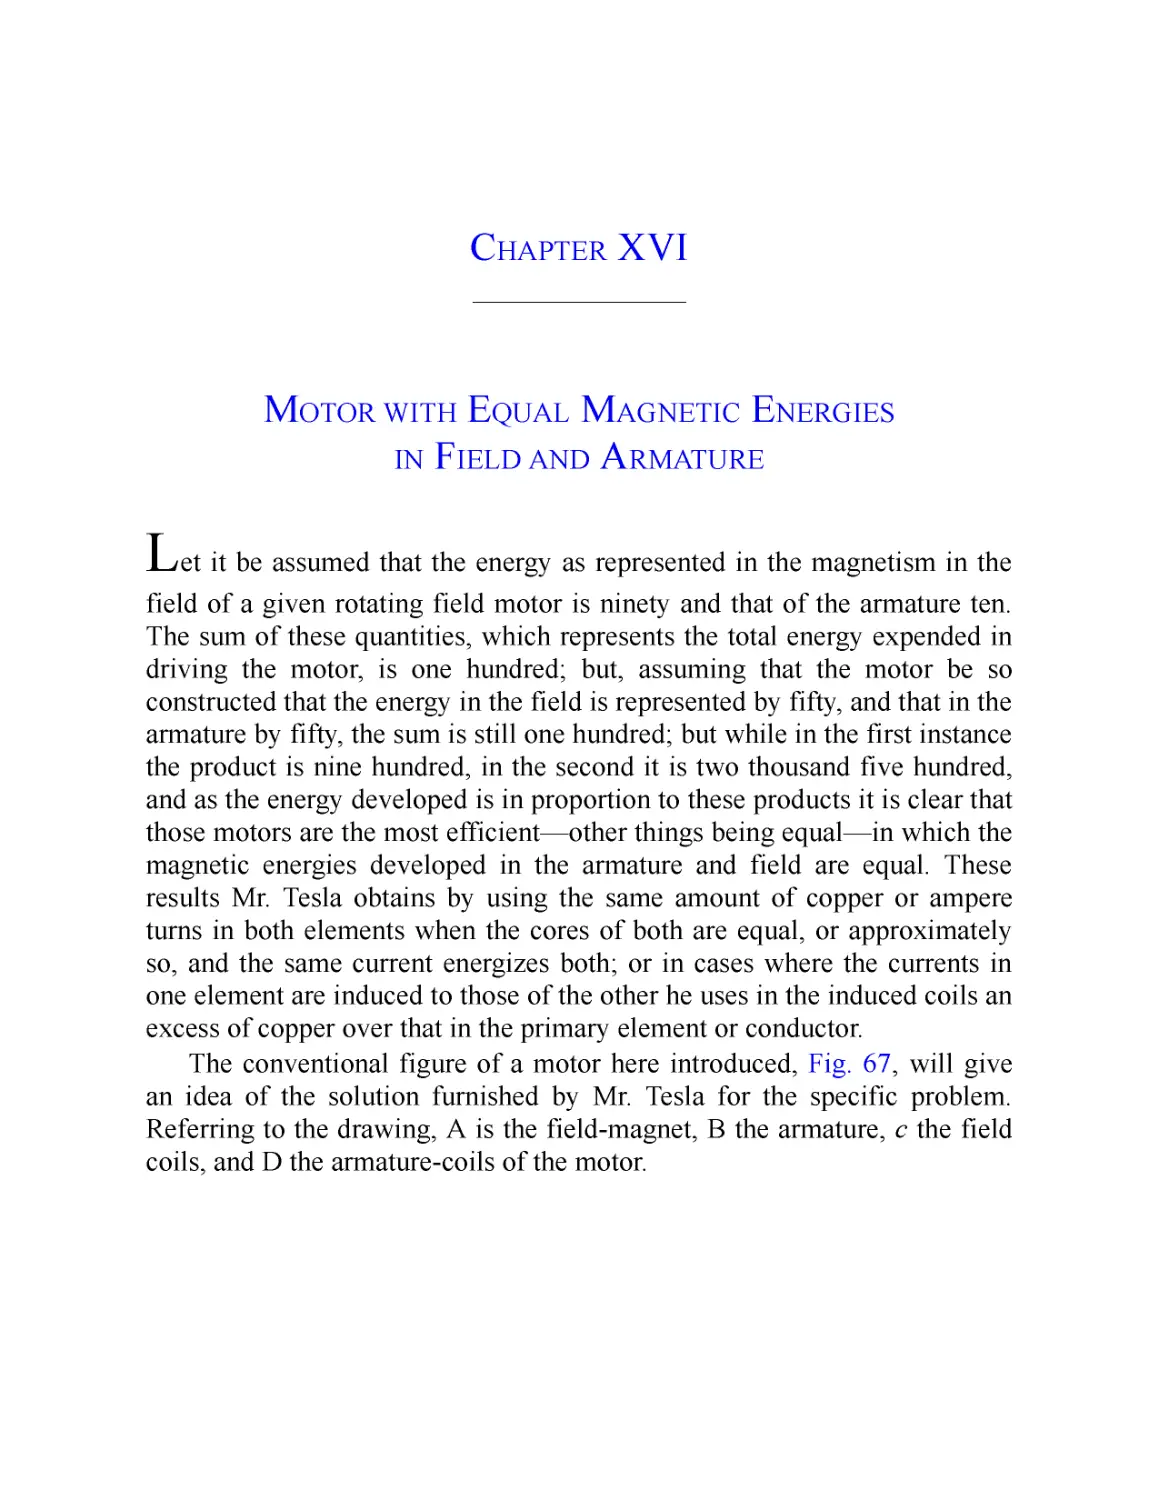 ﻿Chapter XVI: Motor with Equal Magnetic Energies in Field and Armatur